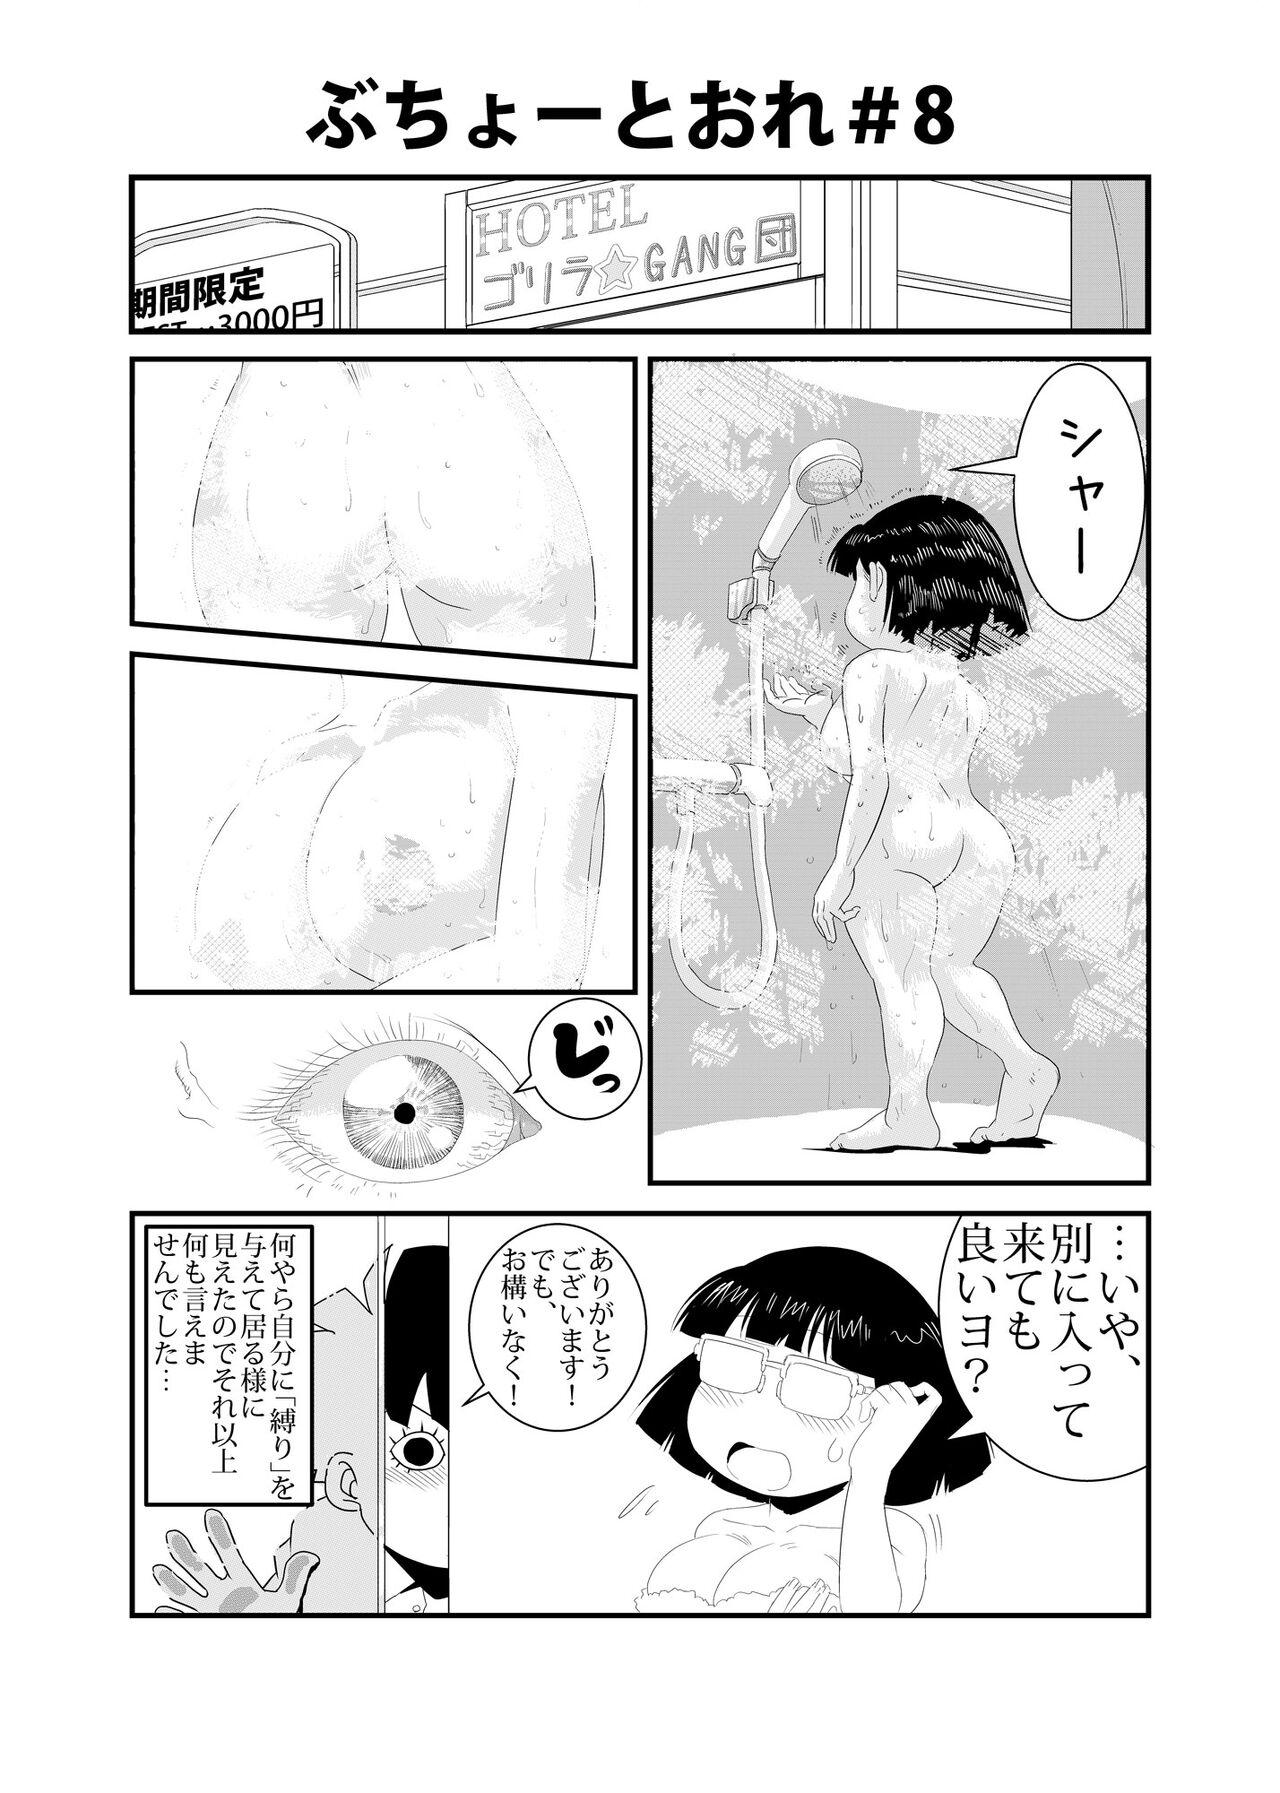 Gaystraight Buchou to Ore - Original  - Page 8